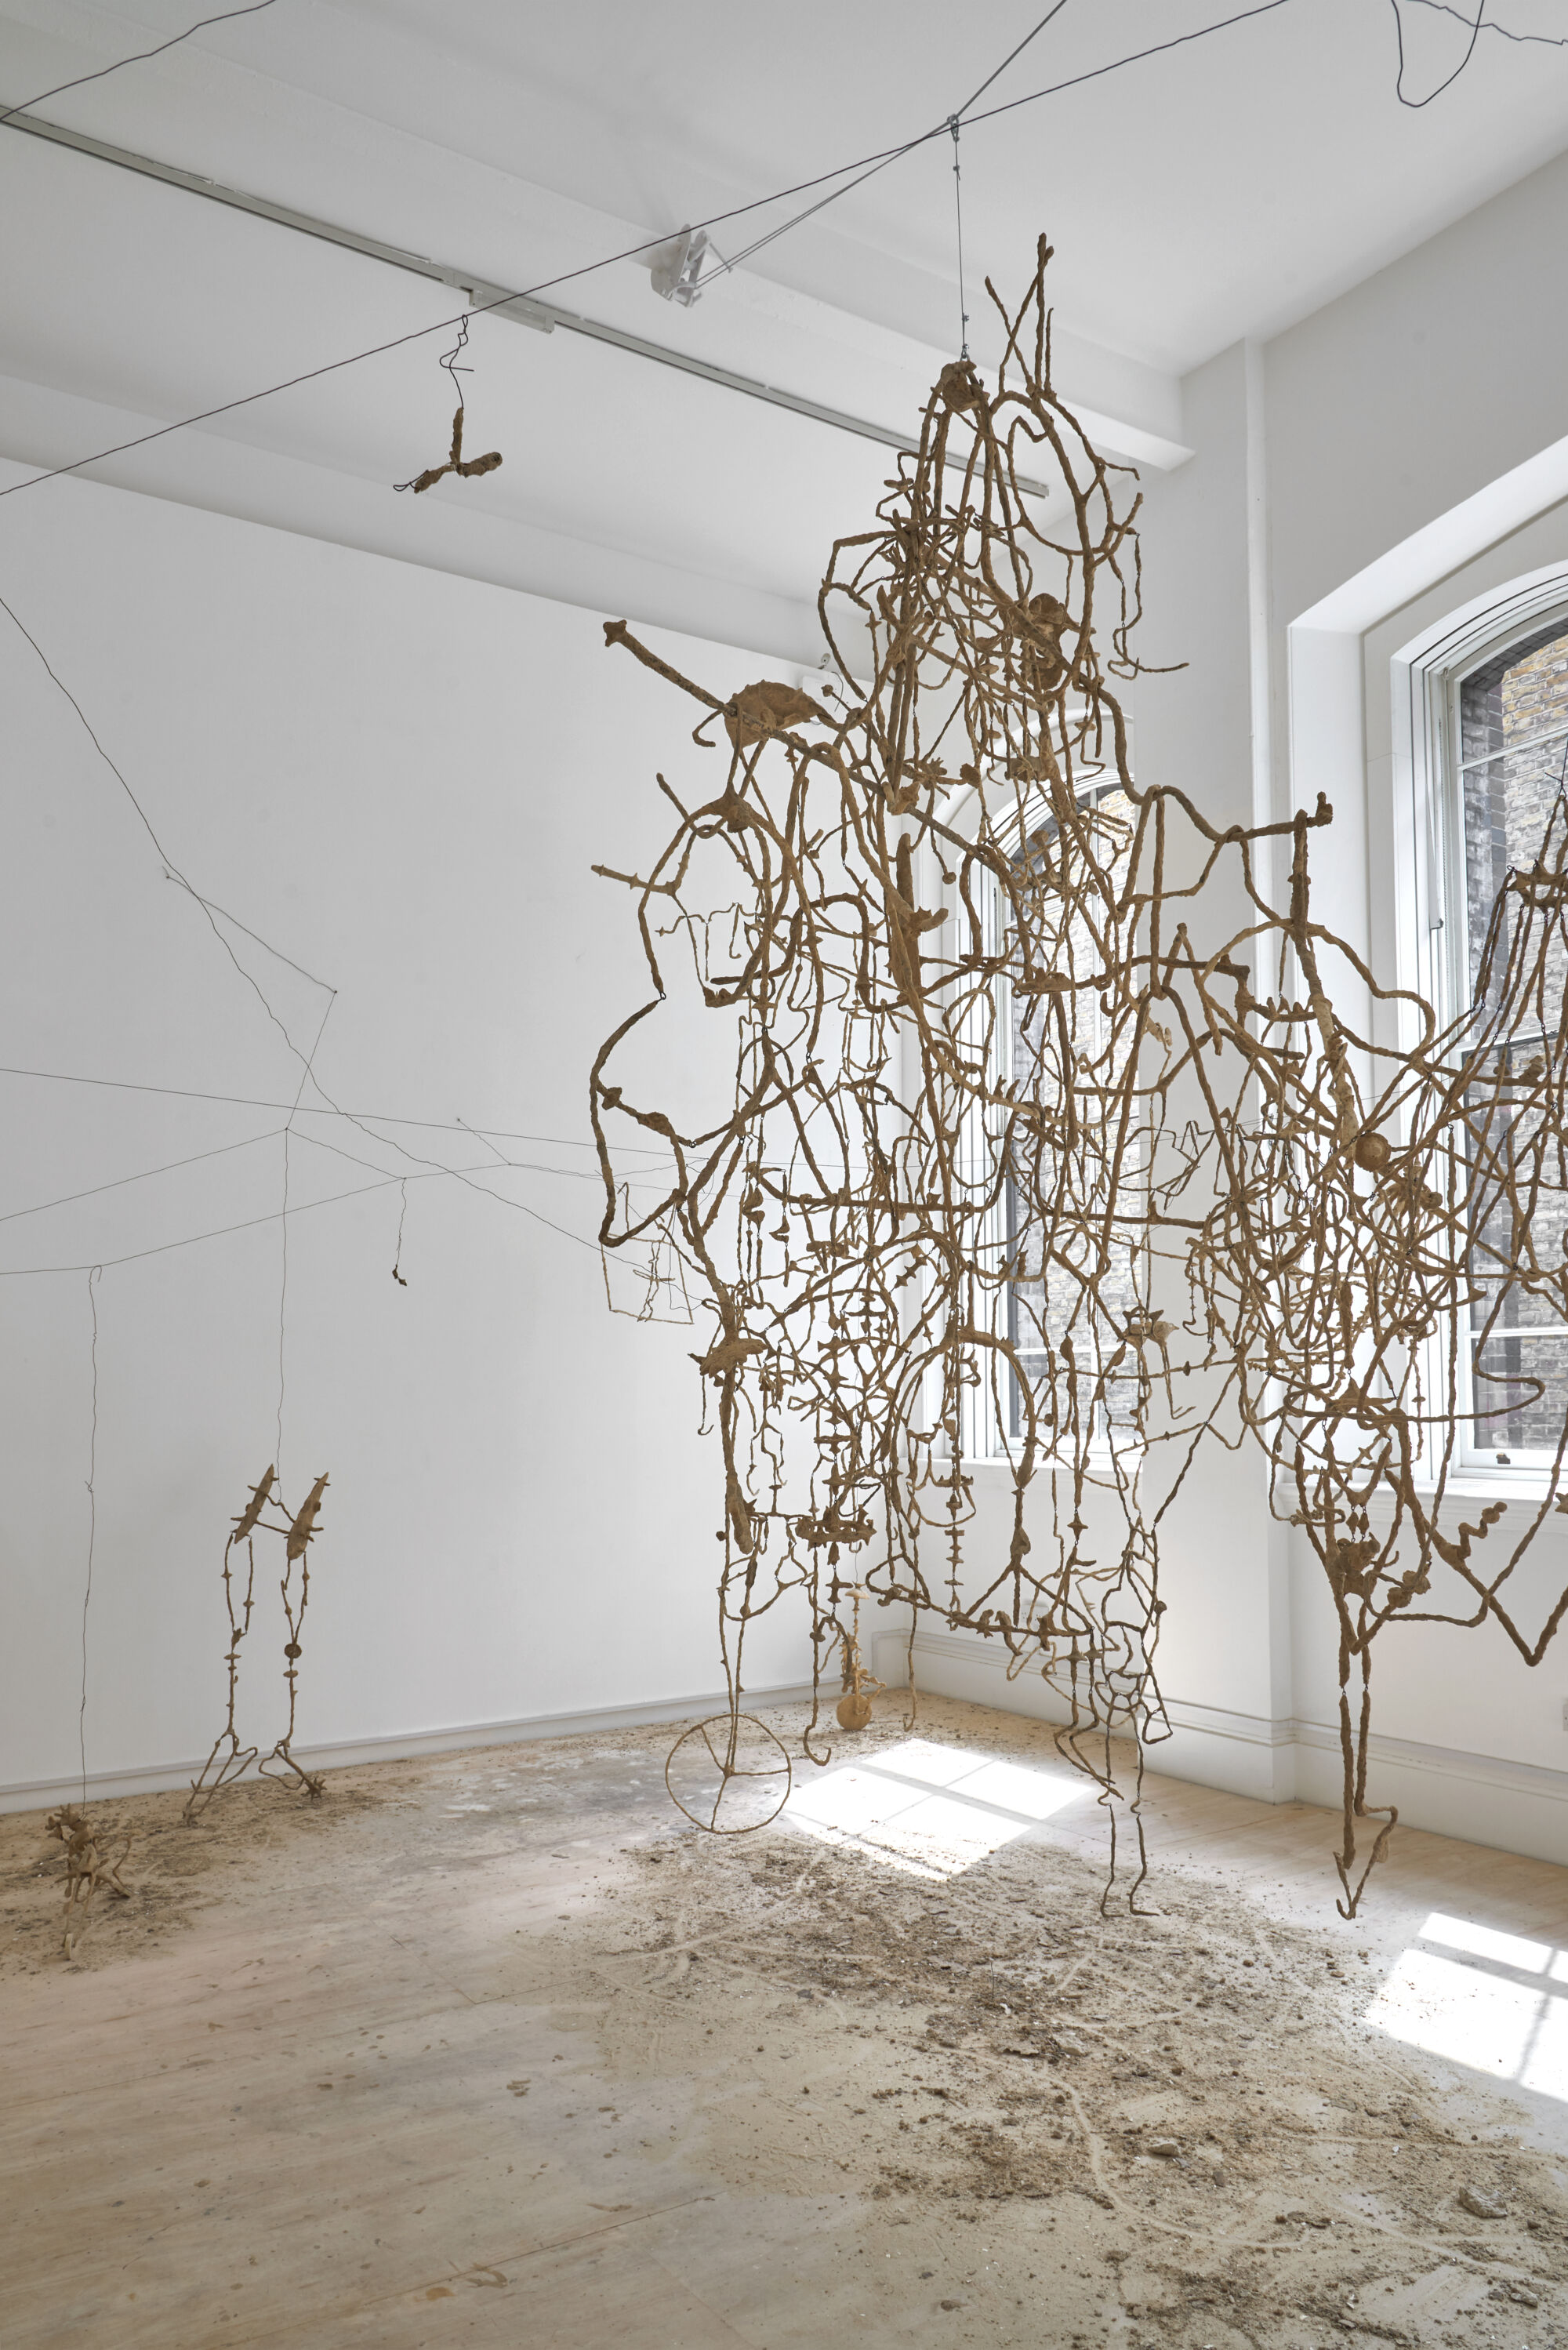 The Wick - Enej Gala
Neighbour's harvest, 2023
Installation view, Royal Academy Schools Show, 2023
Repurposed sawdust from the workshop, PVA glue, wire, metal, wood, detritus
Dimensions variable
Photo: Andy Keate
